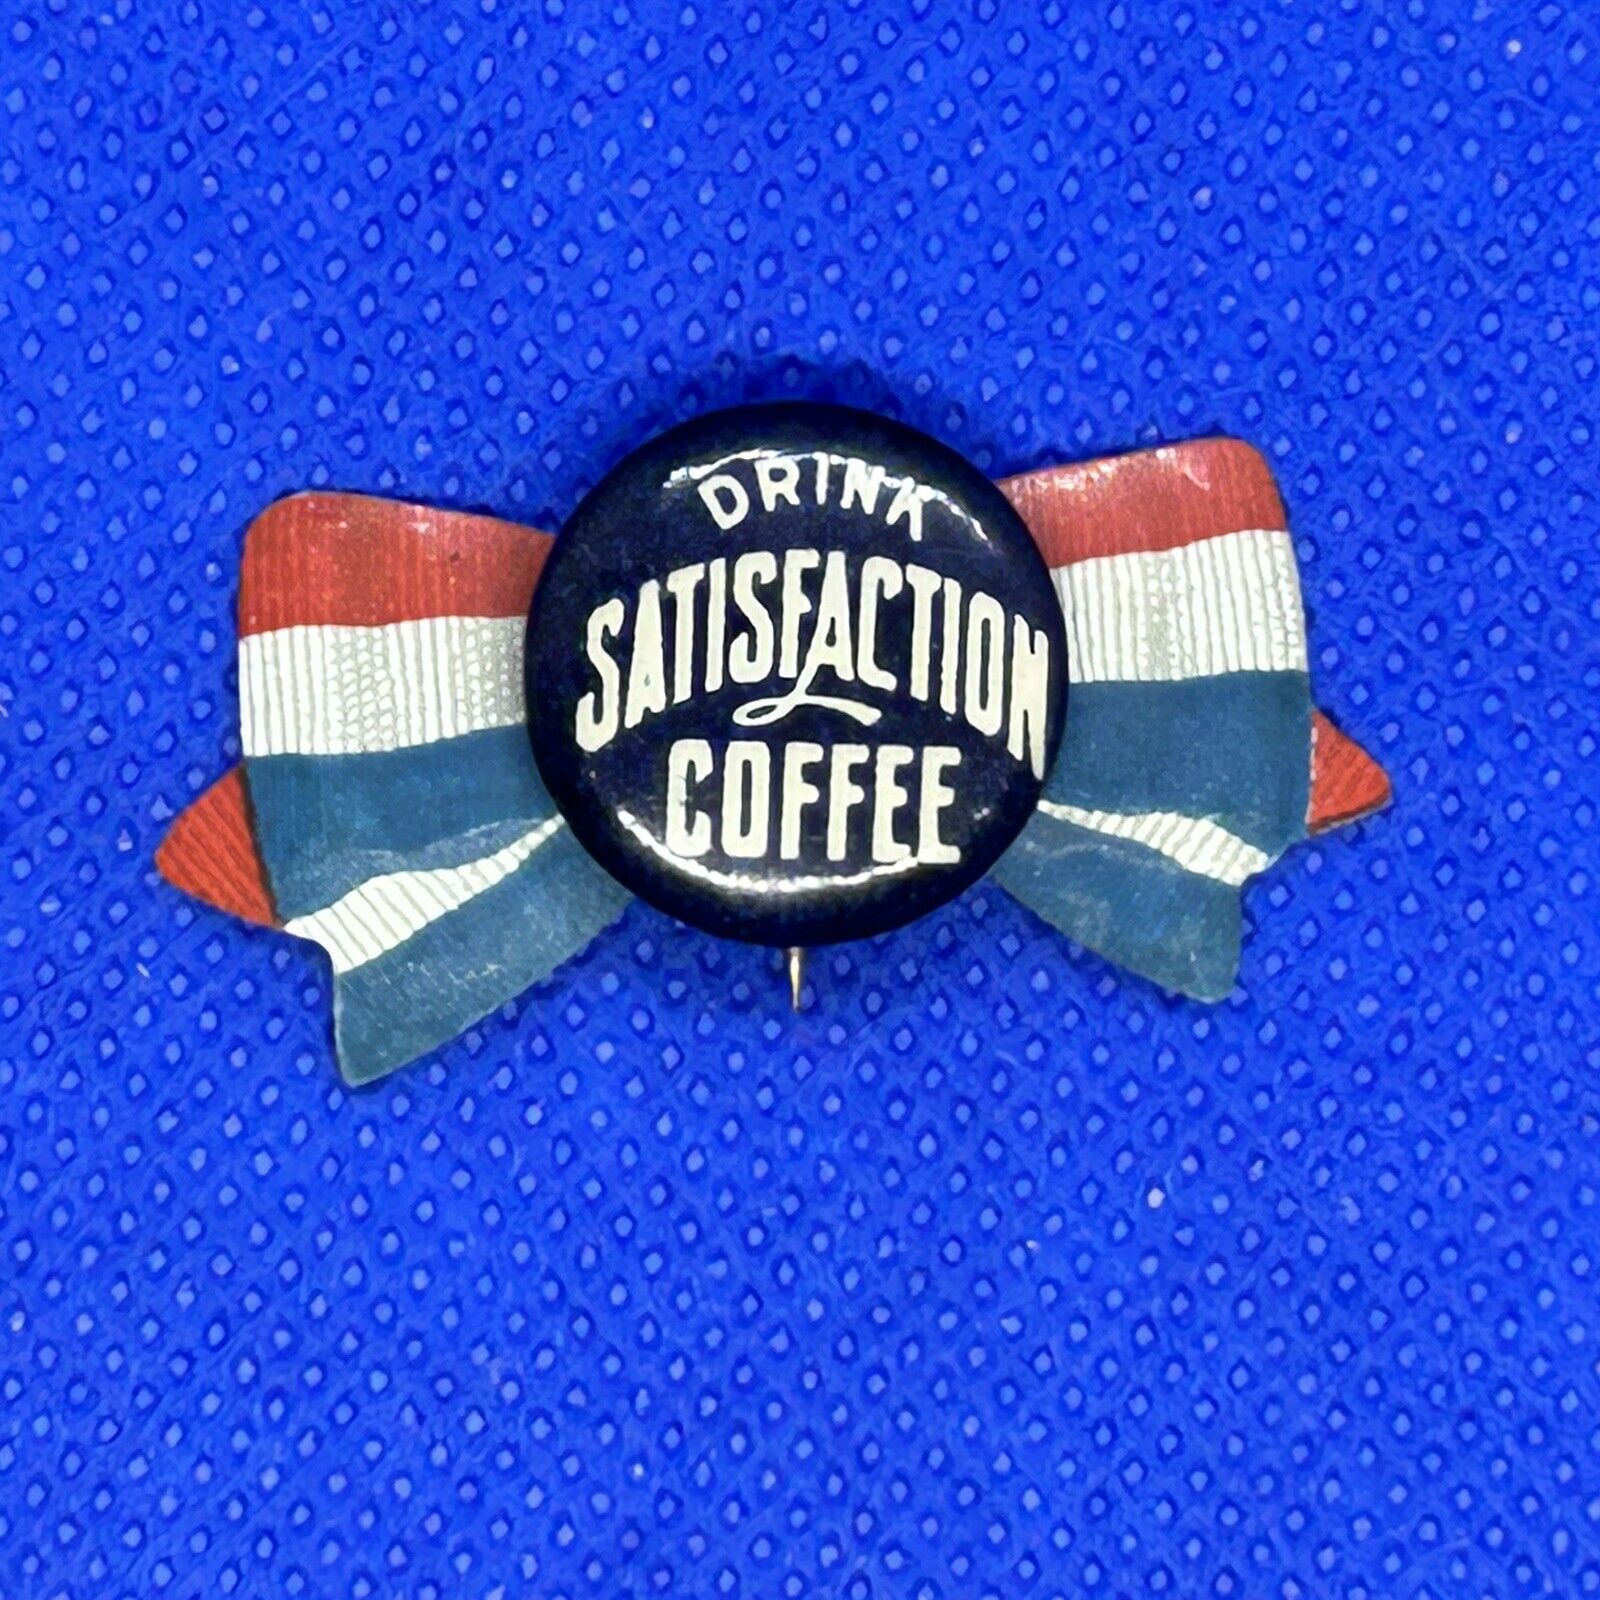 Vintage Antique - Drink Satisfaction Coffee Advertising Pin - Whitehead Hoag Co